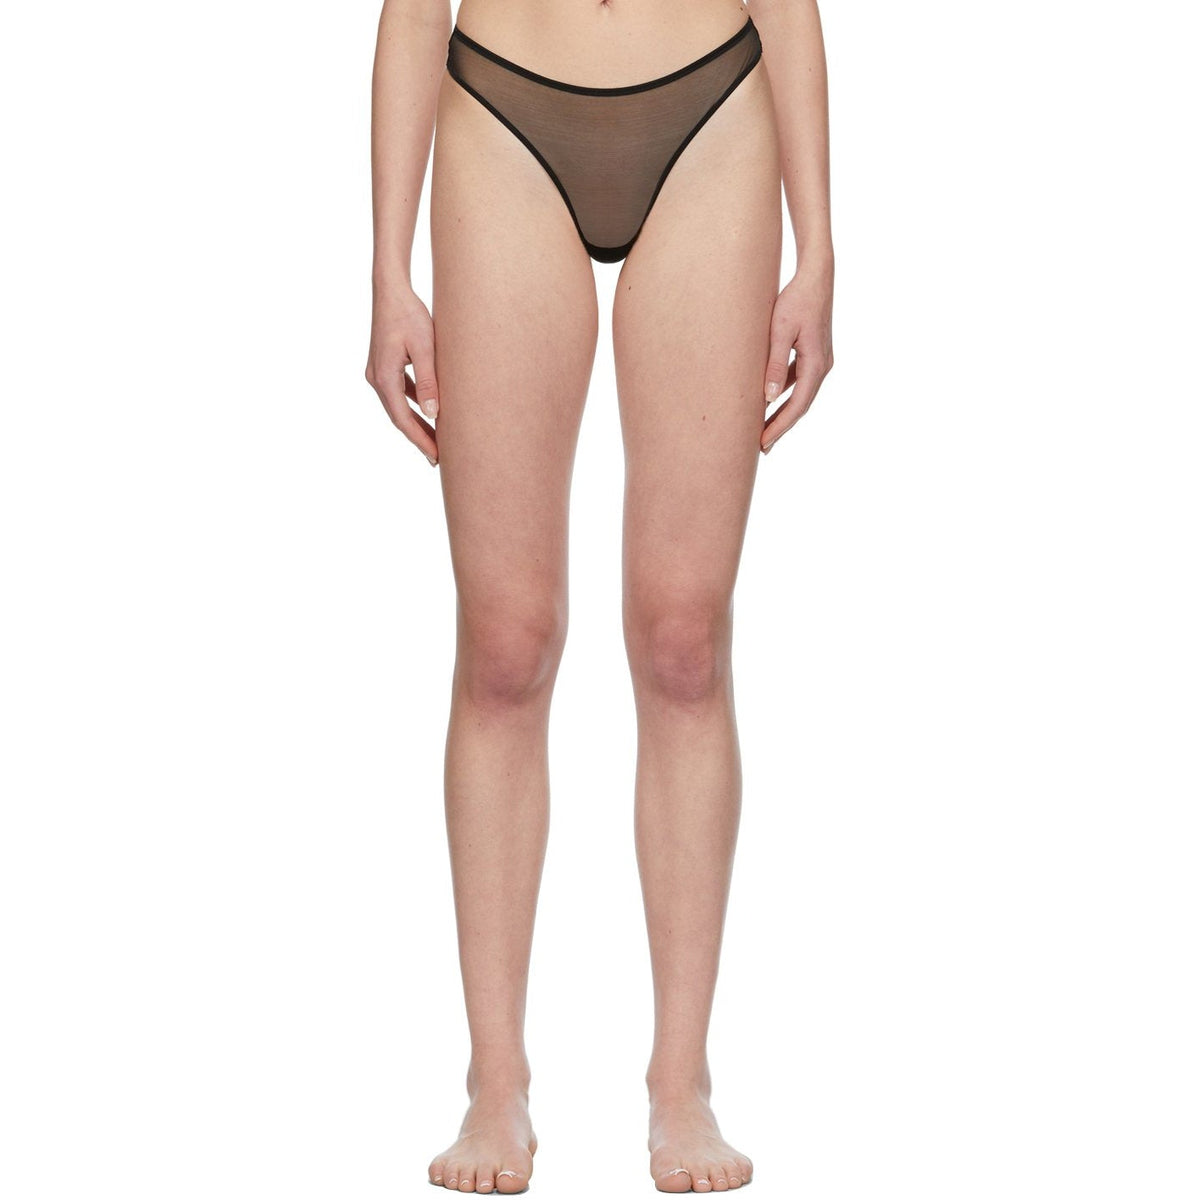 Lucky High Leg Brief in Black | Agent Provocateur All Lingerie